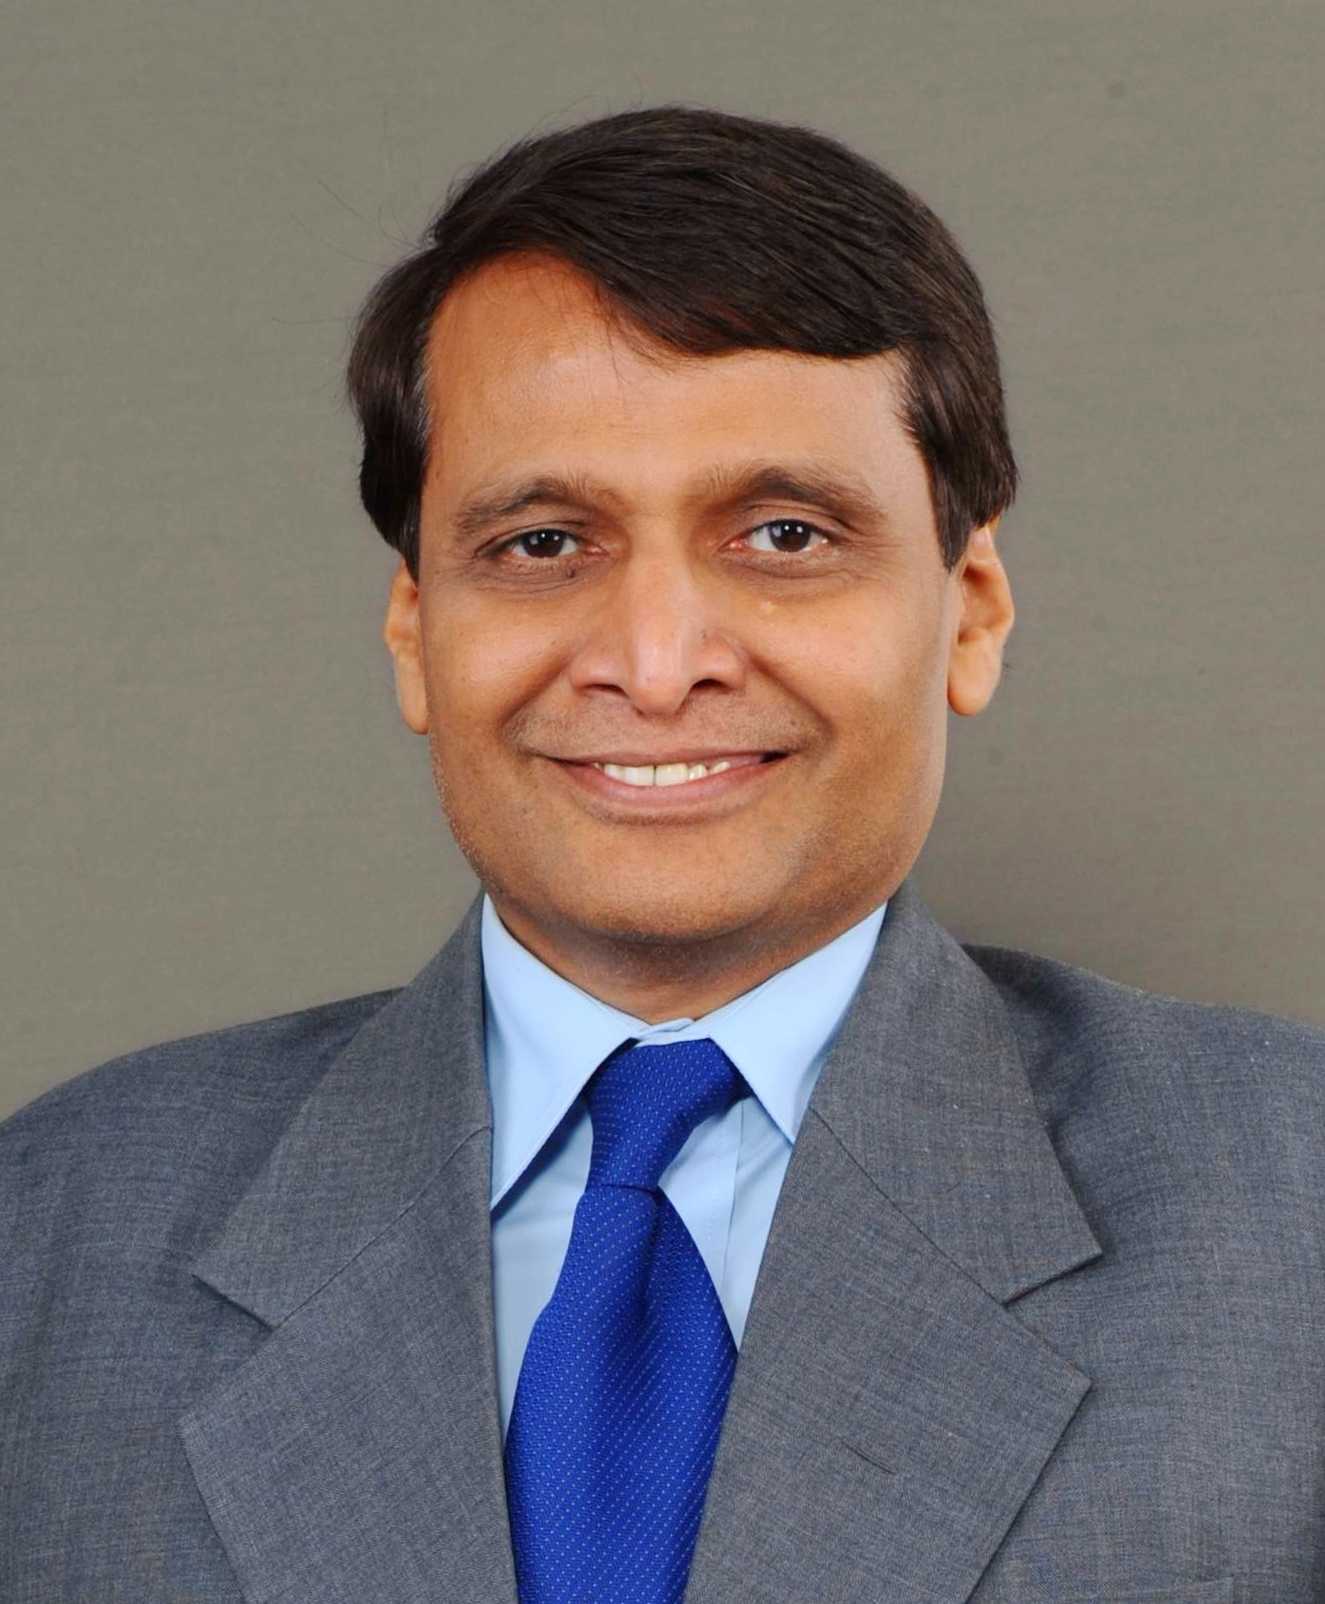 <strong>Chief Guest</strong> <br/>Suresh Prabhu, <span>Sherpa to Hon'ble Prime Minister of India for G20, G7 & Member of Parliament</span>